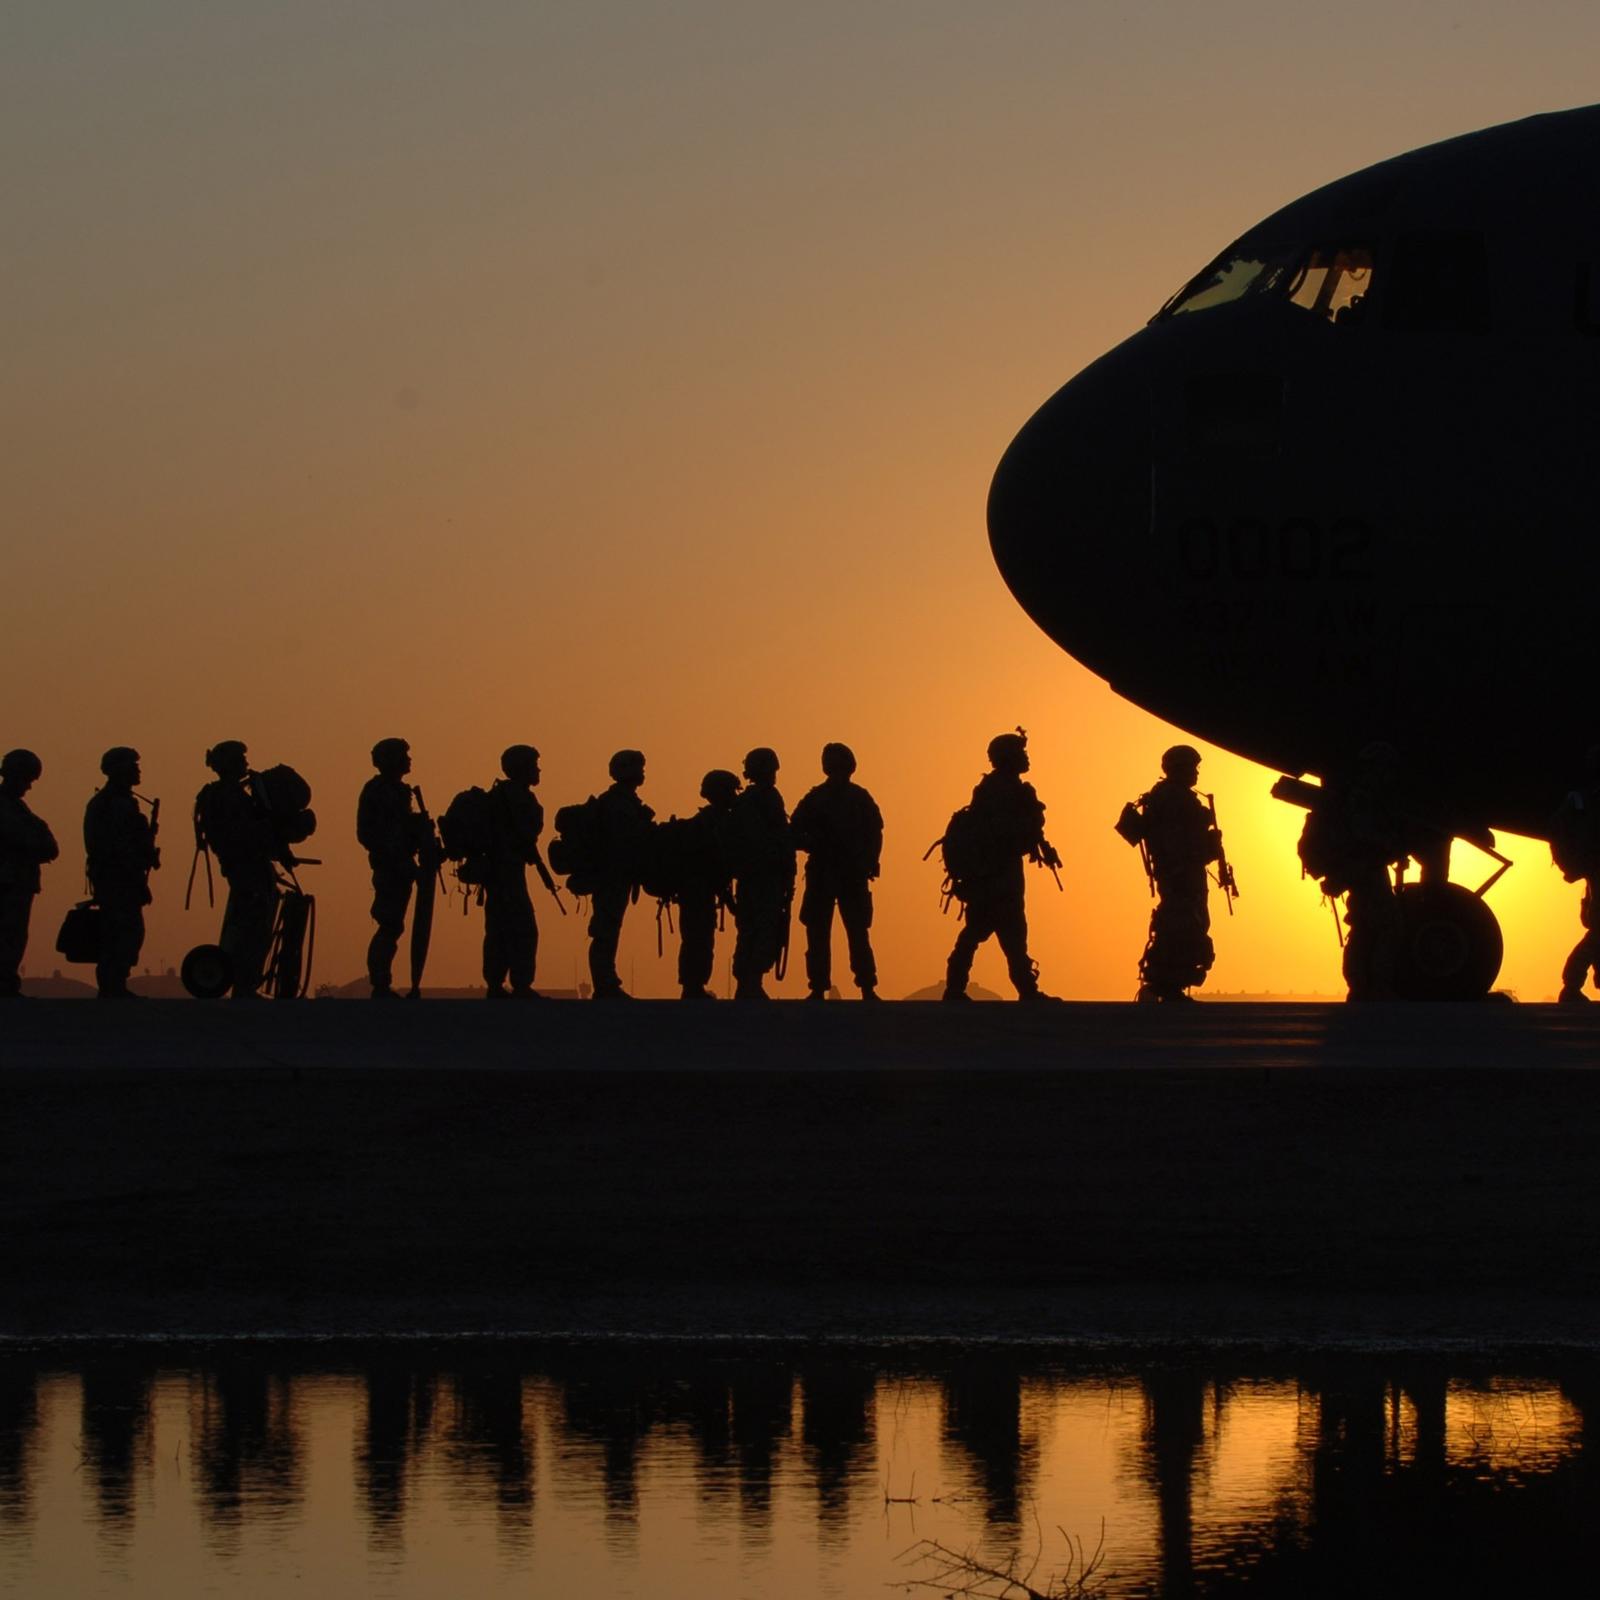 Soldiers silhouettes getting on plane